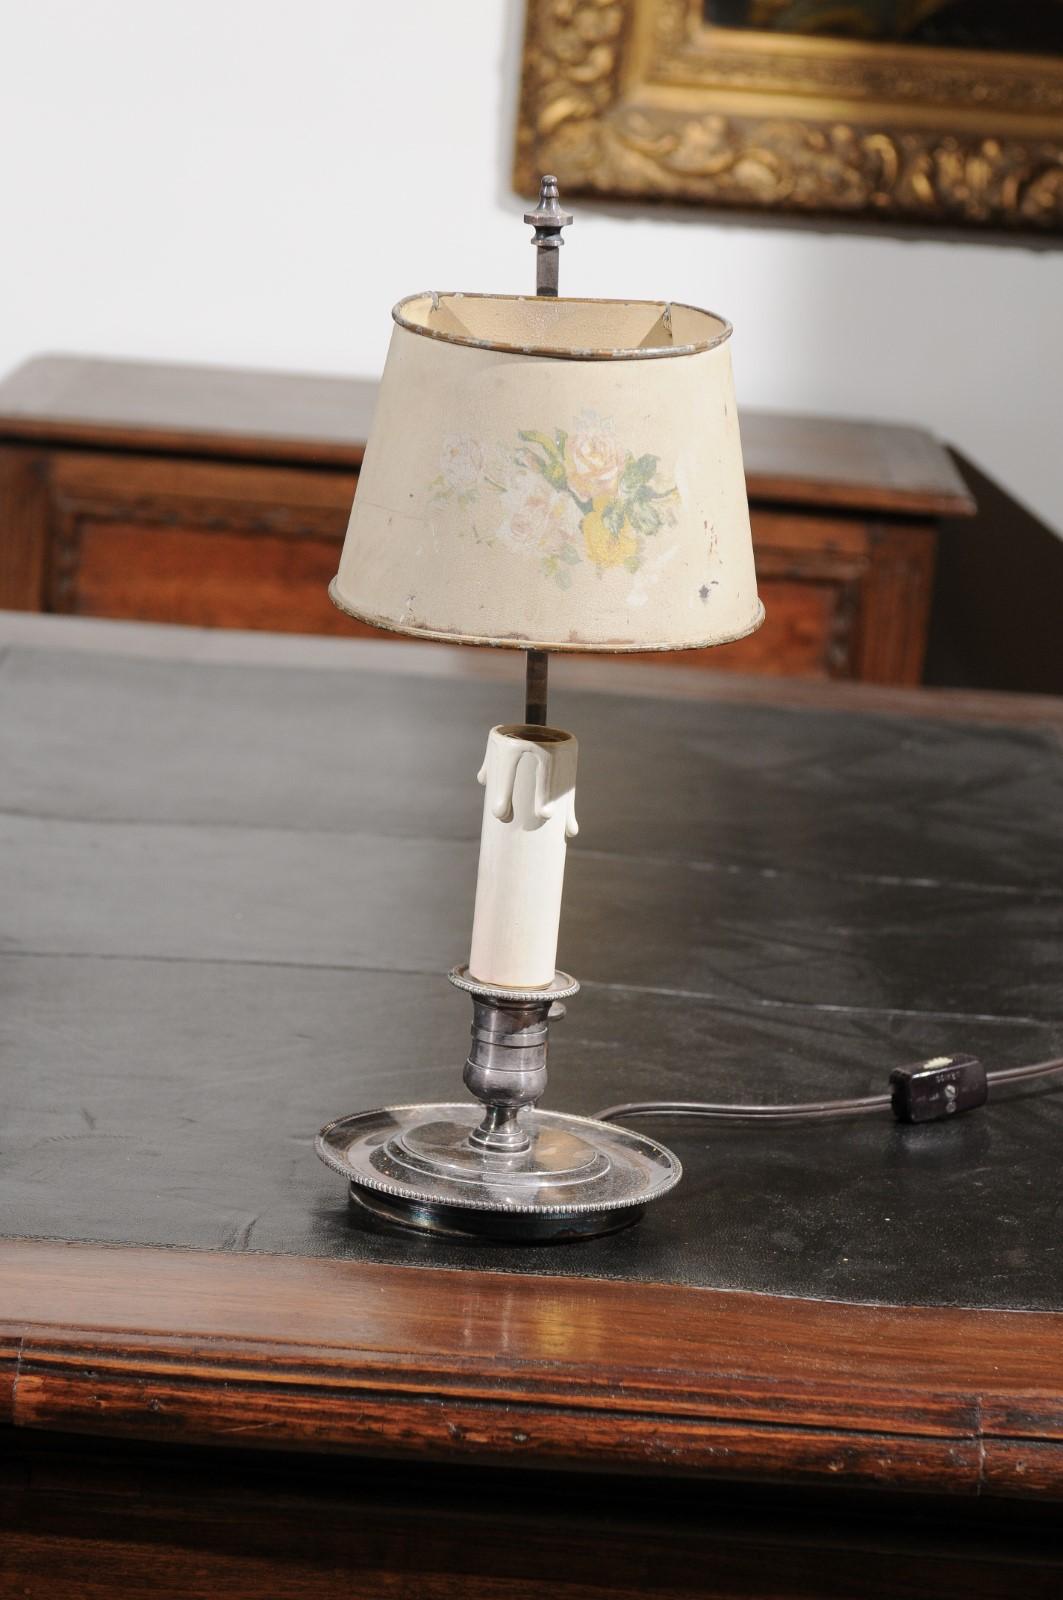 A French tôle lamp from the 19th century, with original hand painted shade. Born in France during the 19th century, this charming tôle lamp is adorned with a ring in the back that allowed the item to be moved at will. The lamp is resting on a